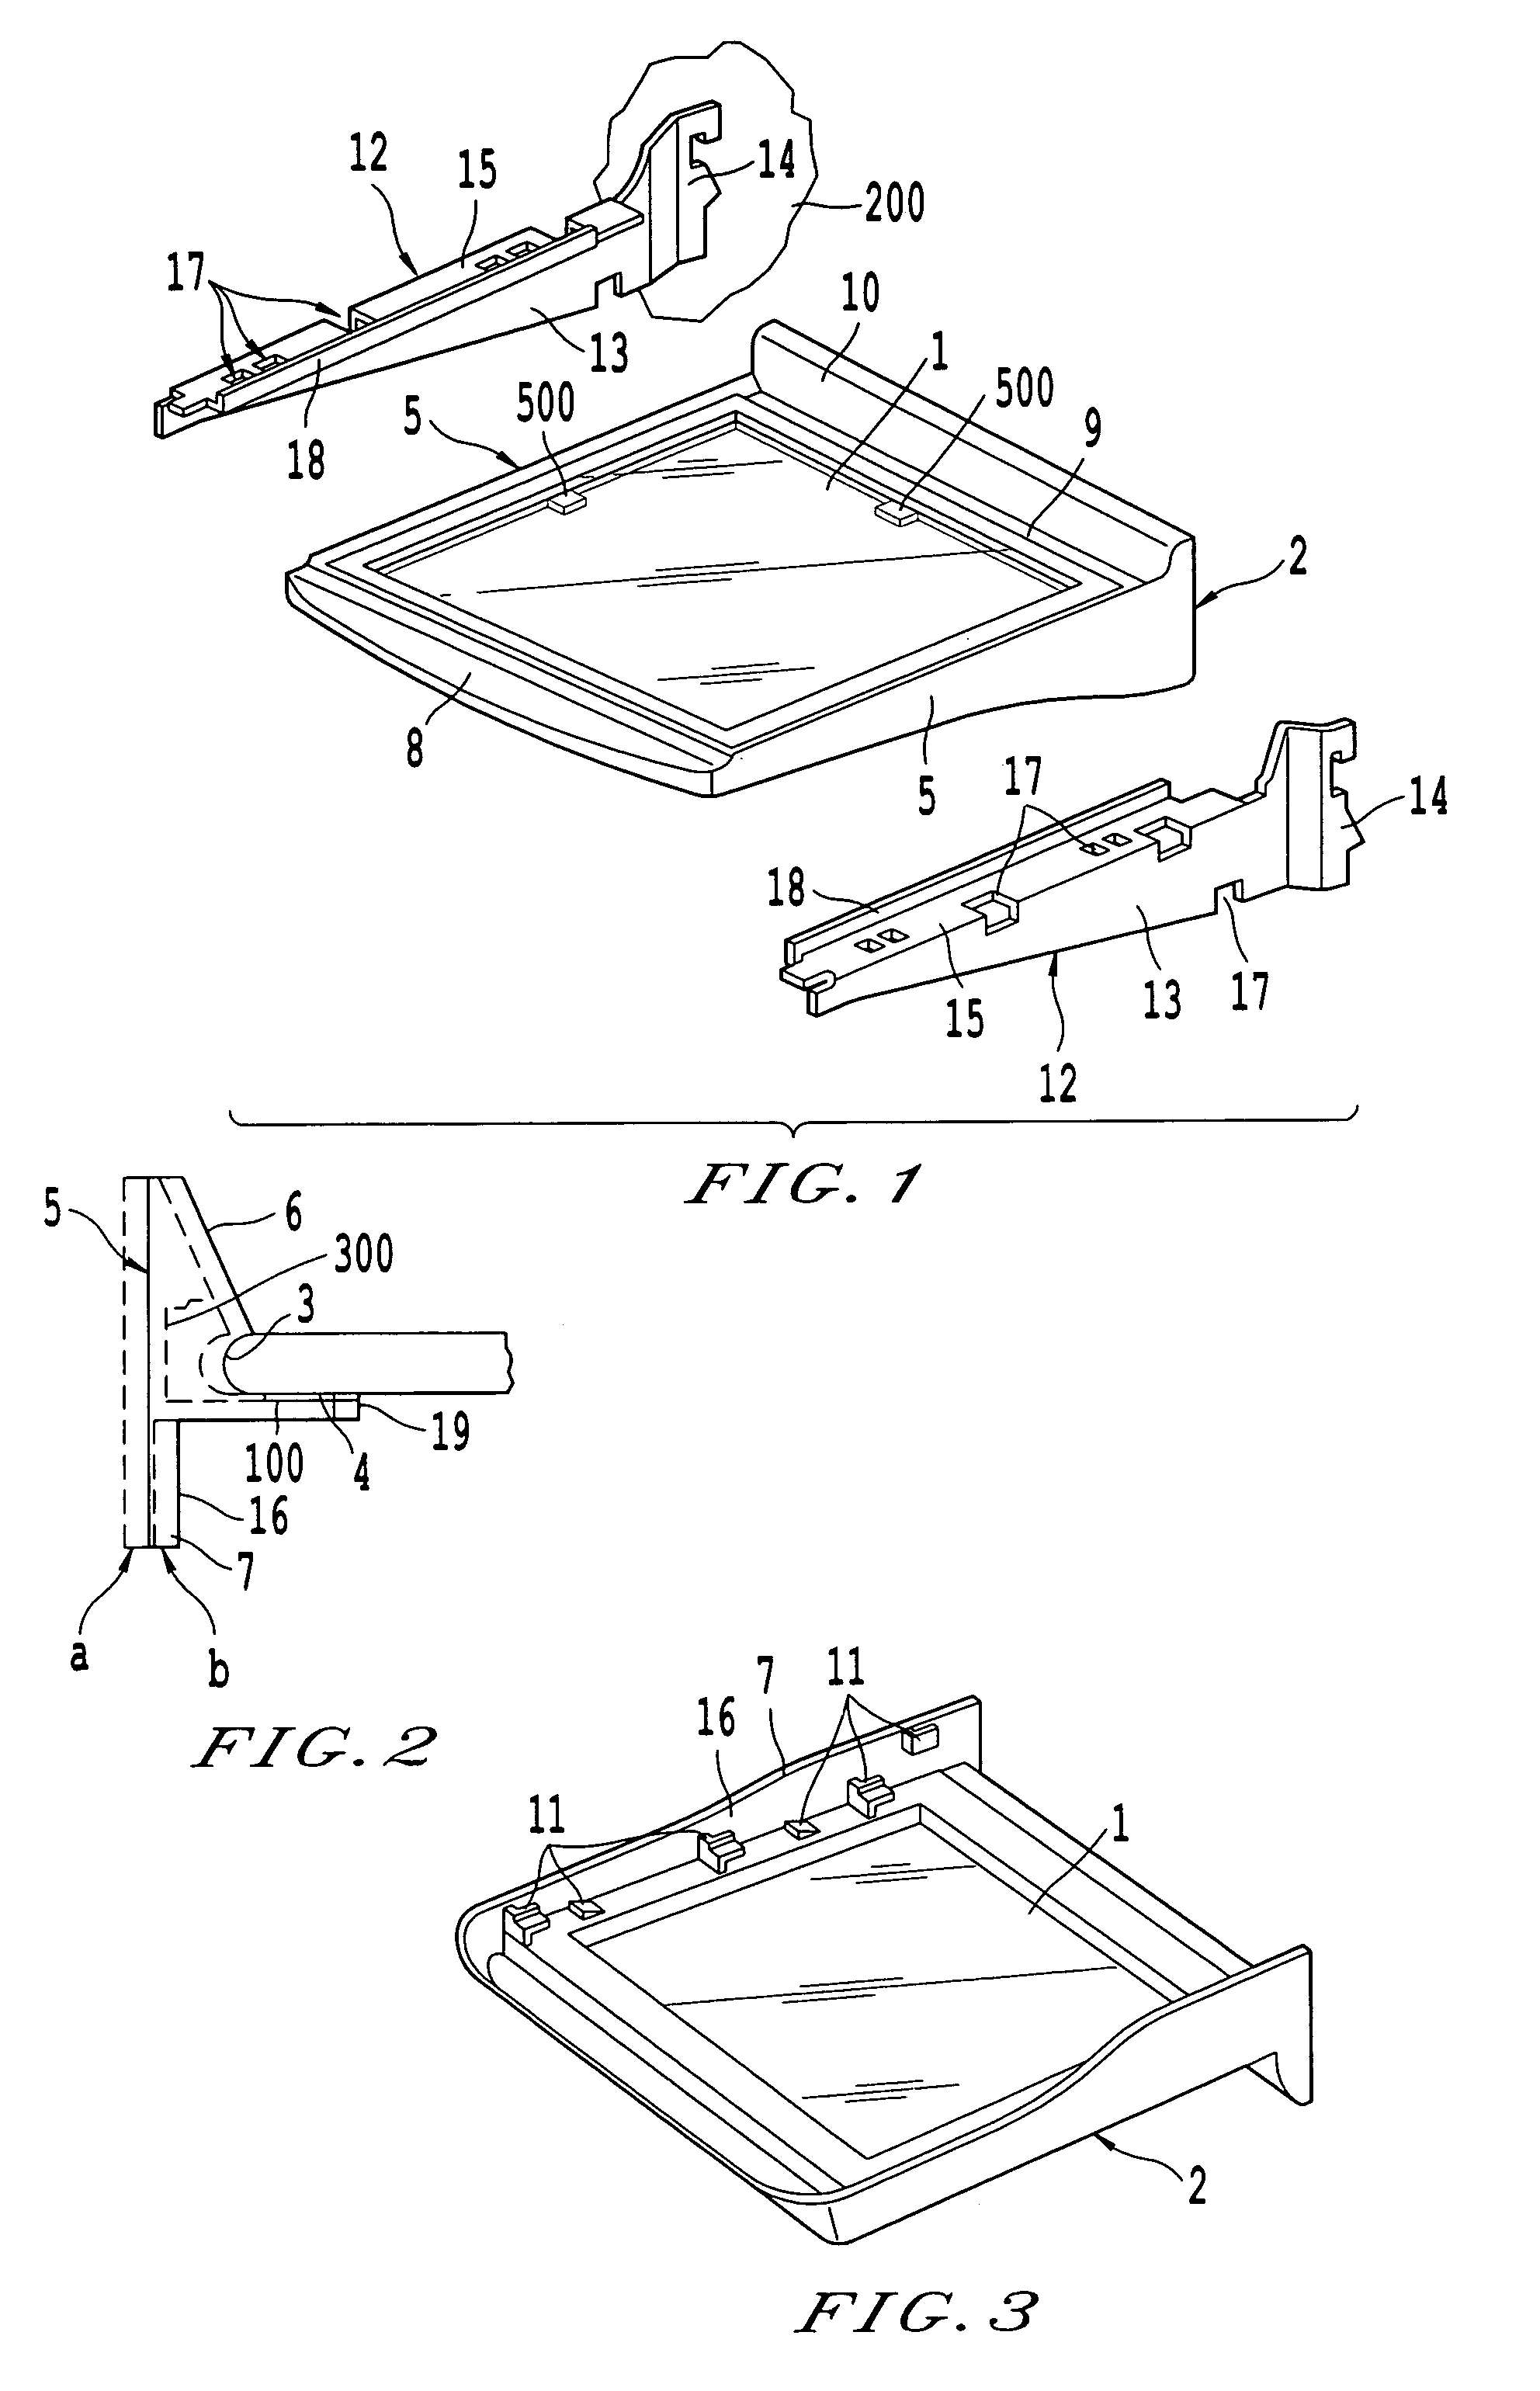 Shelf for supporting articles, particularly in refrigerated installations